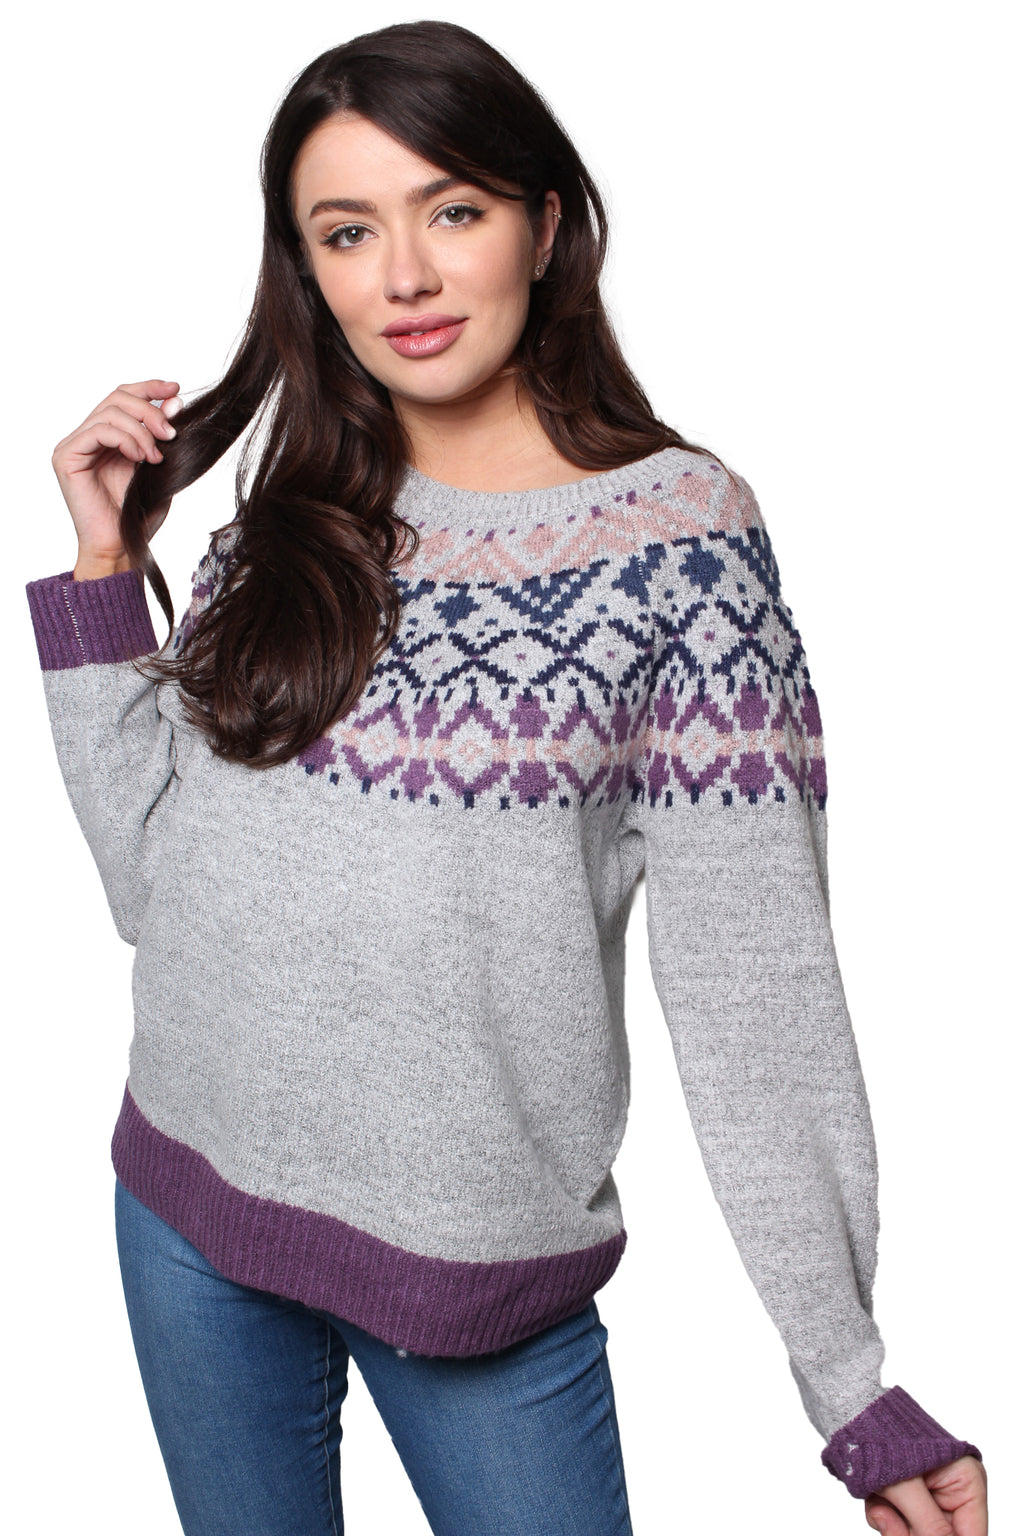 Women's Long Sleeves Round Neck Knitted Jacquard Sweater